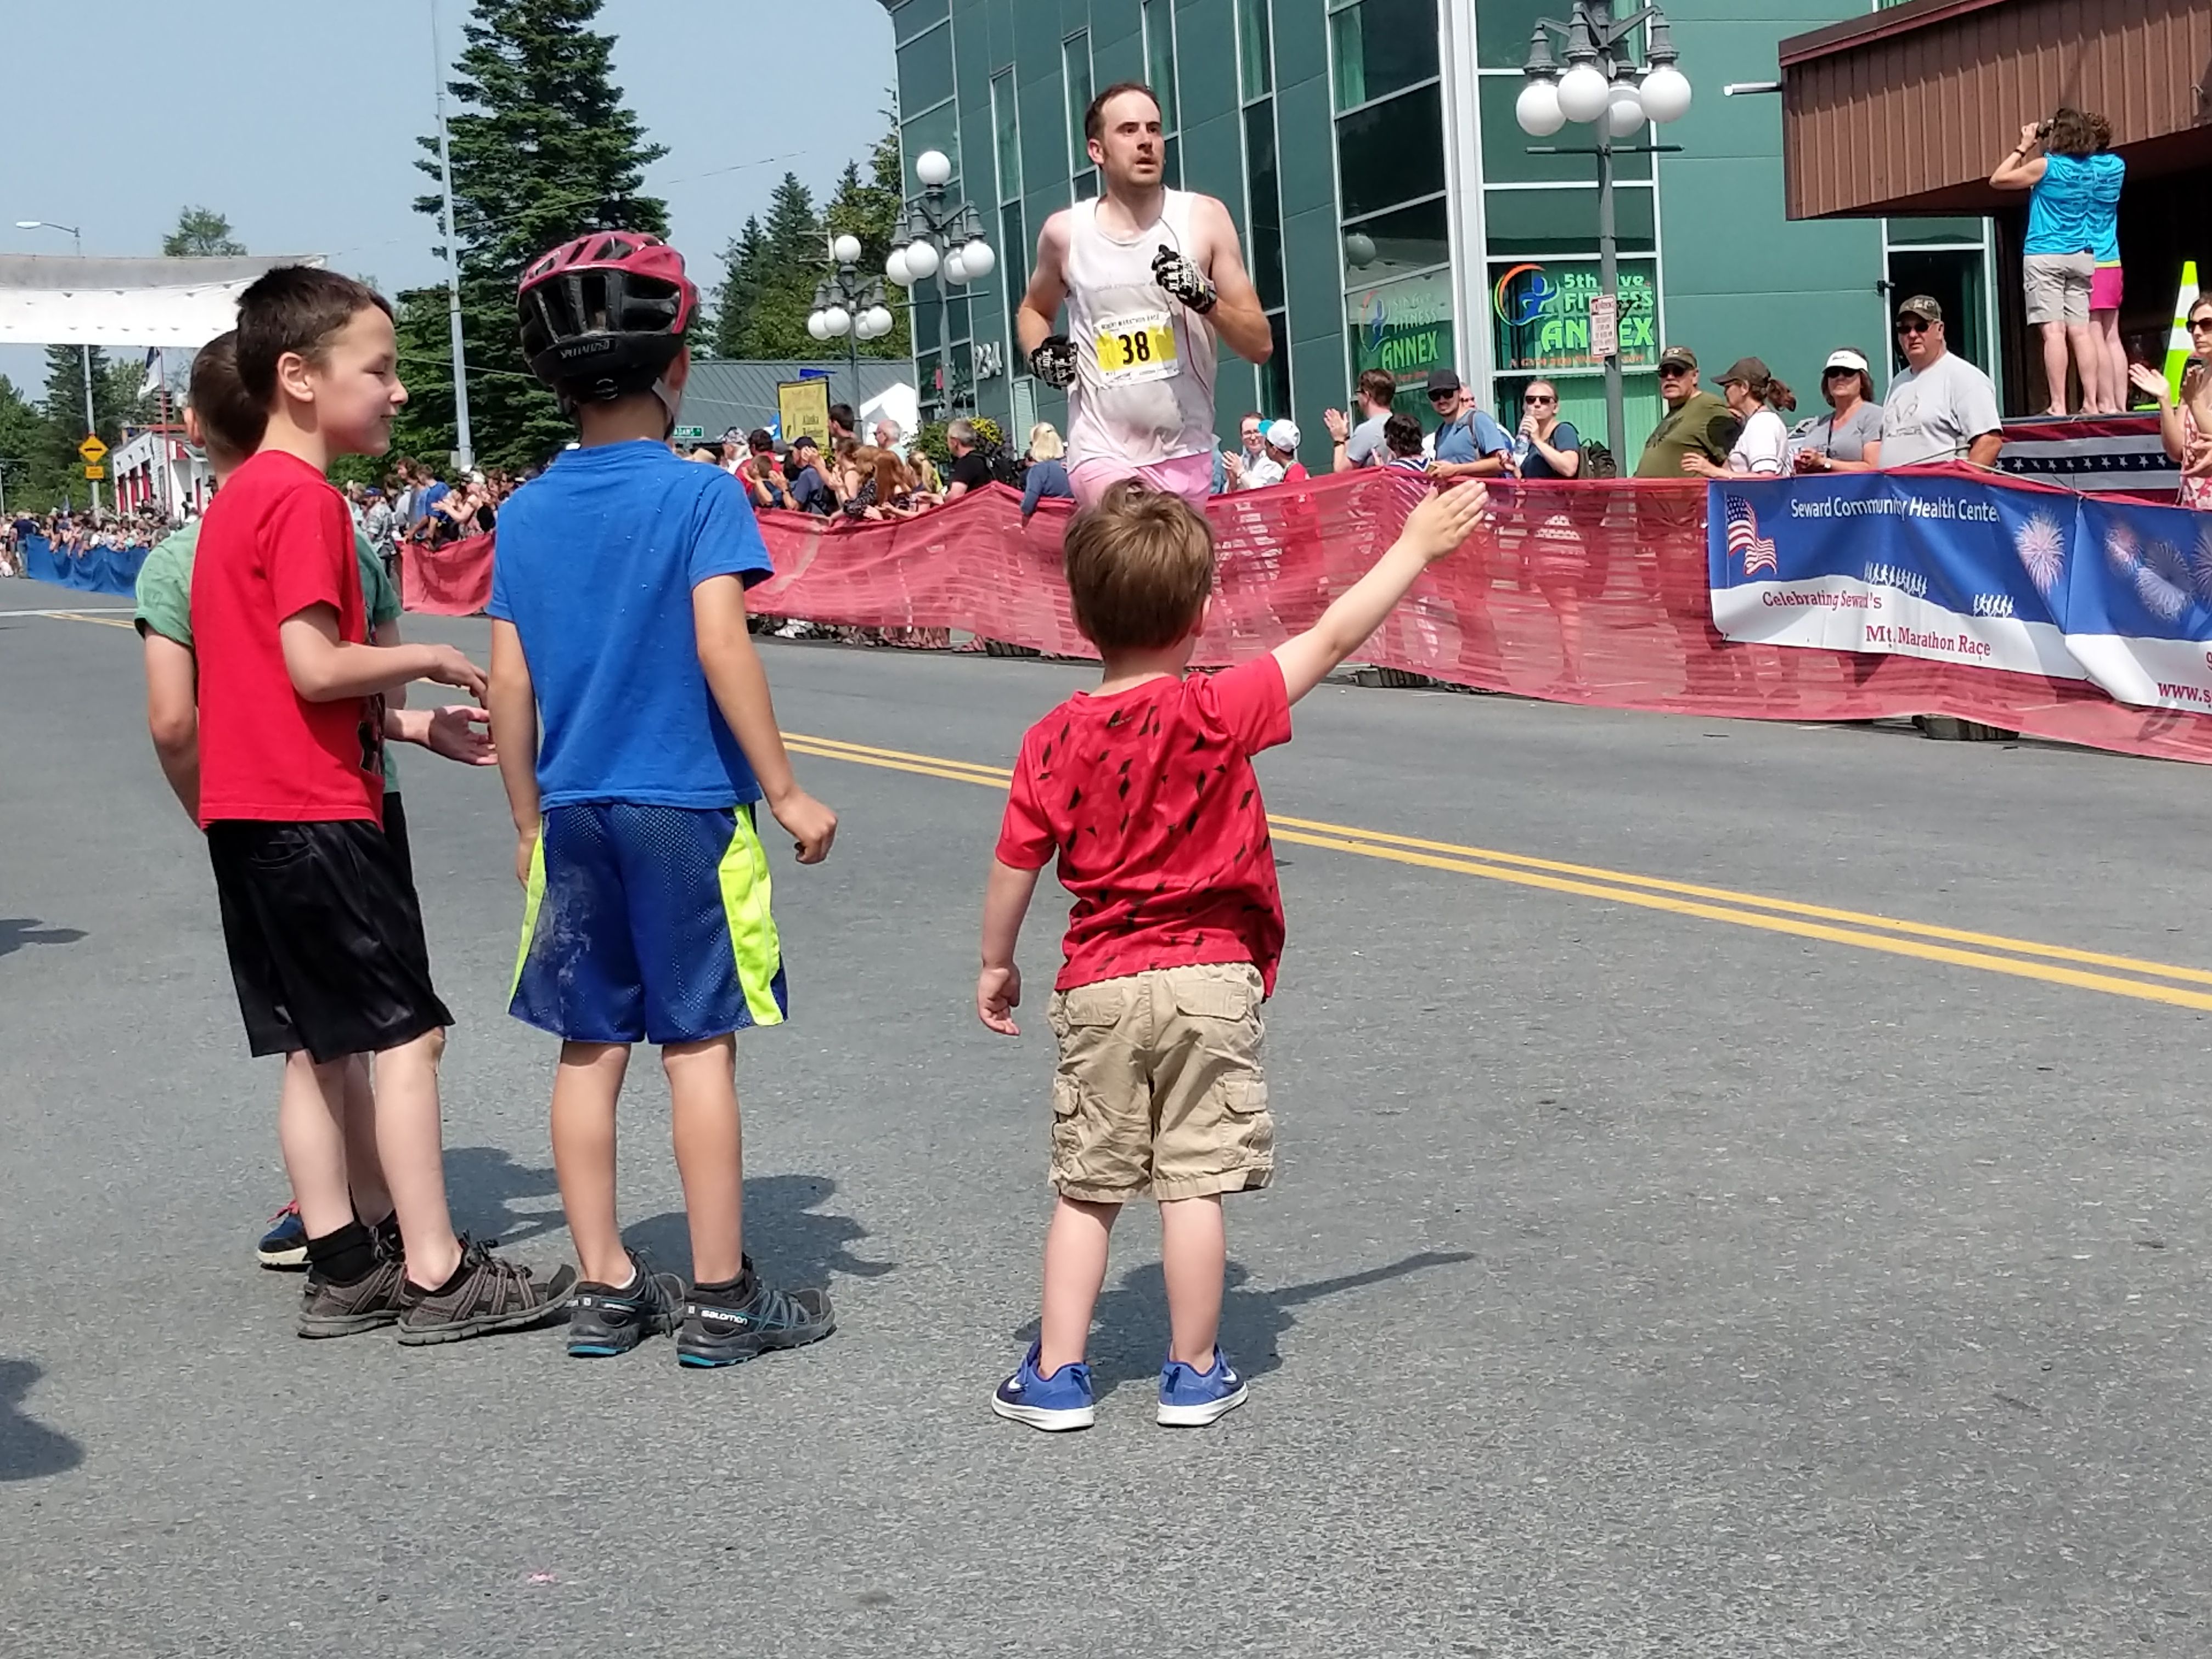 Local little boys welcoming the runners at the end of the race